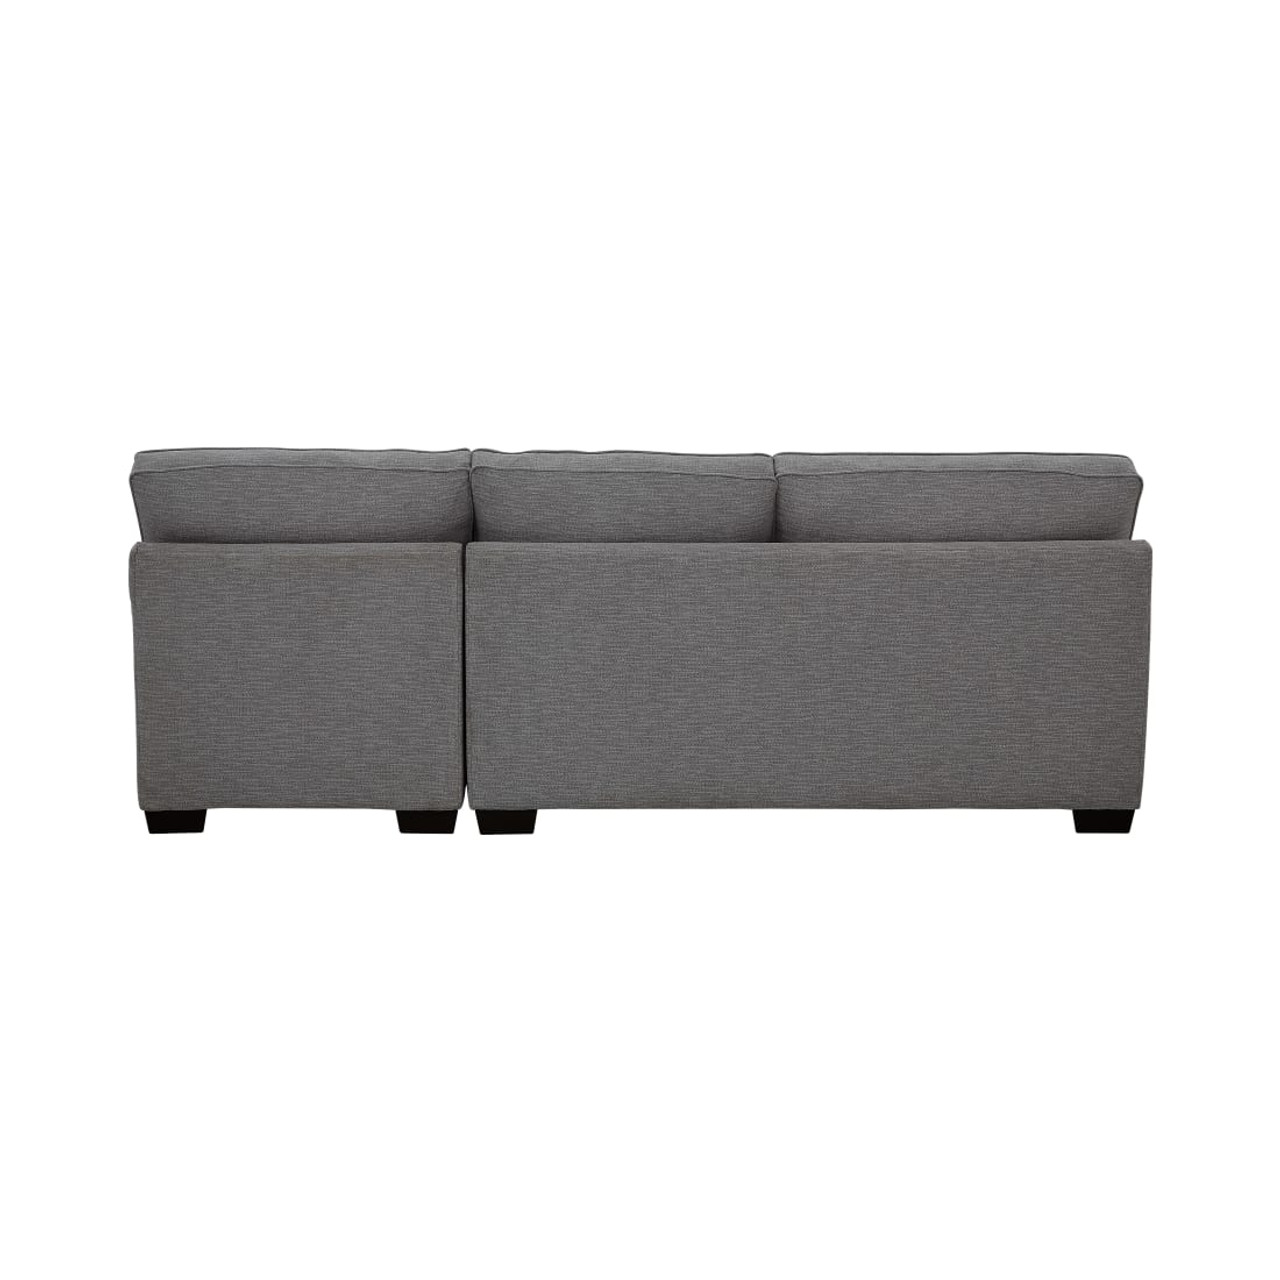 Crestview Track Arm Graphite 2-pc sectional w/ right chaise